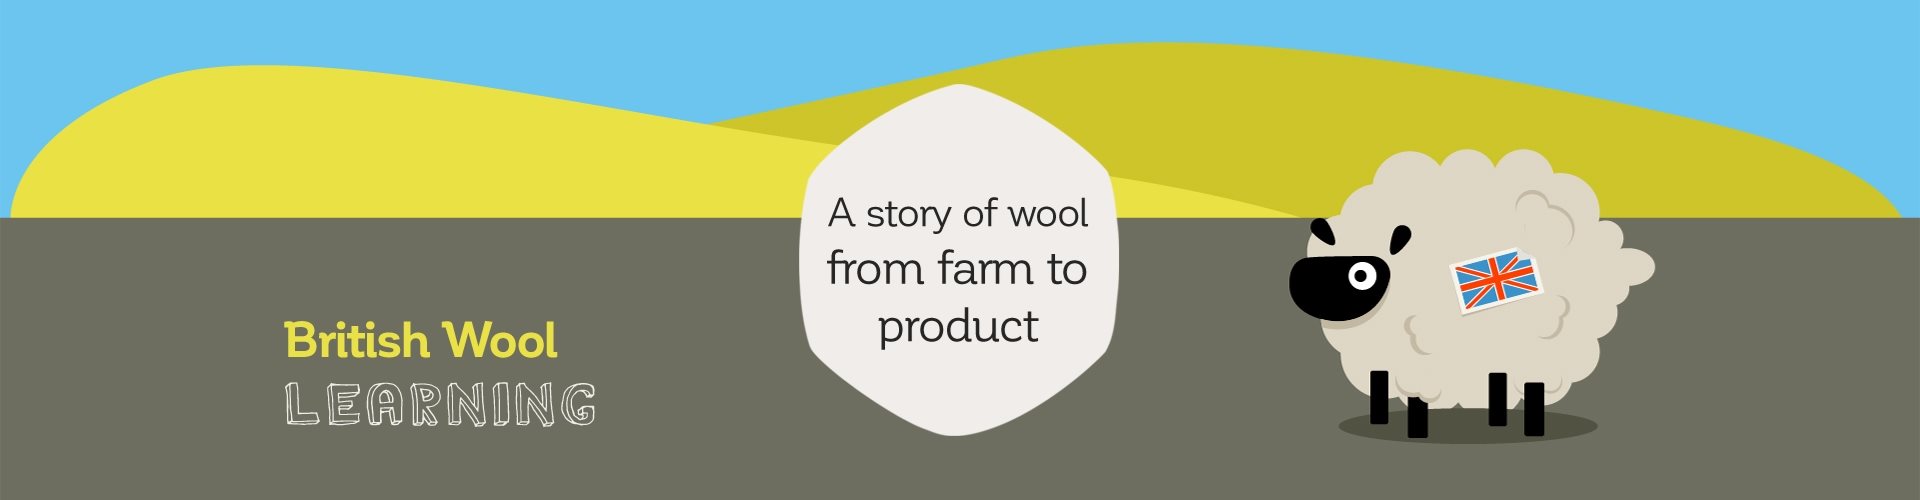 A story of wool from farm to product